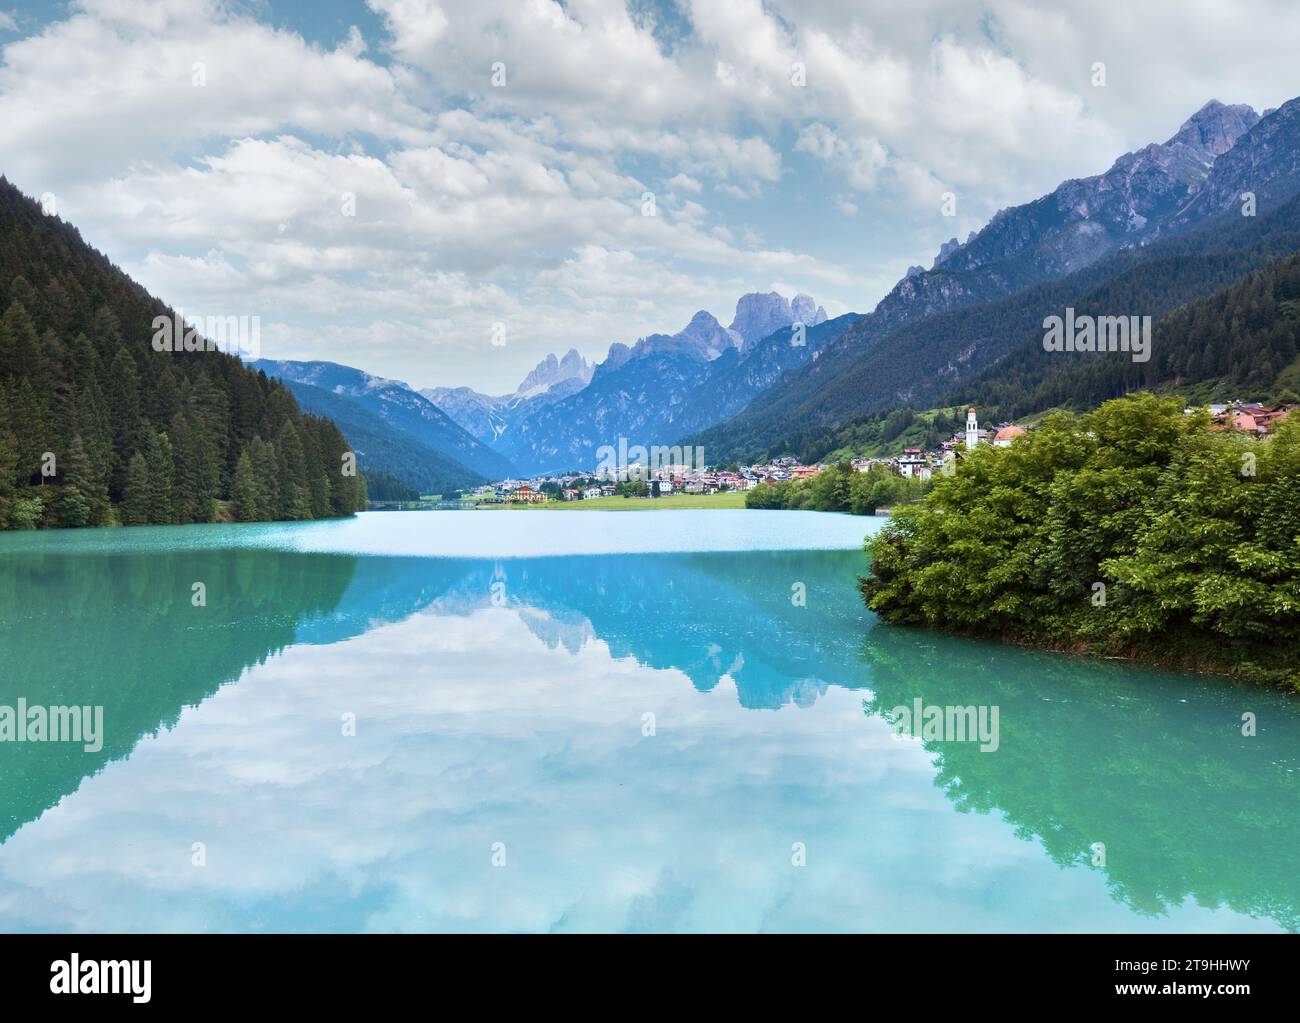 Tranquil summer Italian dolomites mountain lake and village view (Auronzo di Cadore) Stock Photo